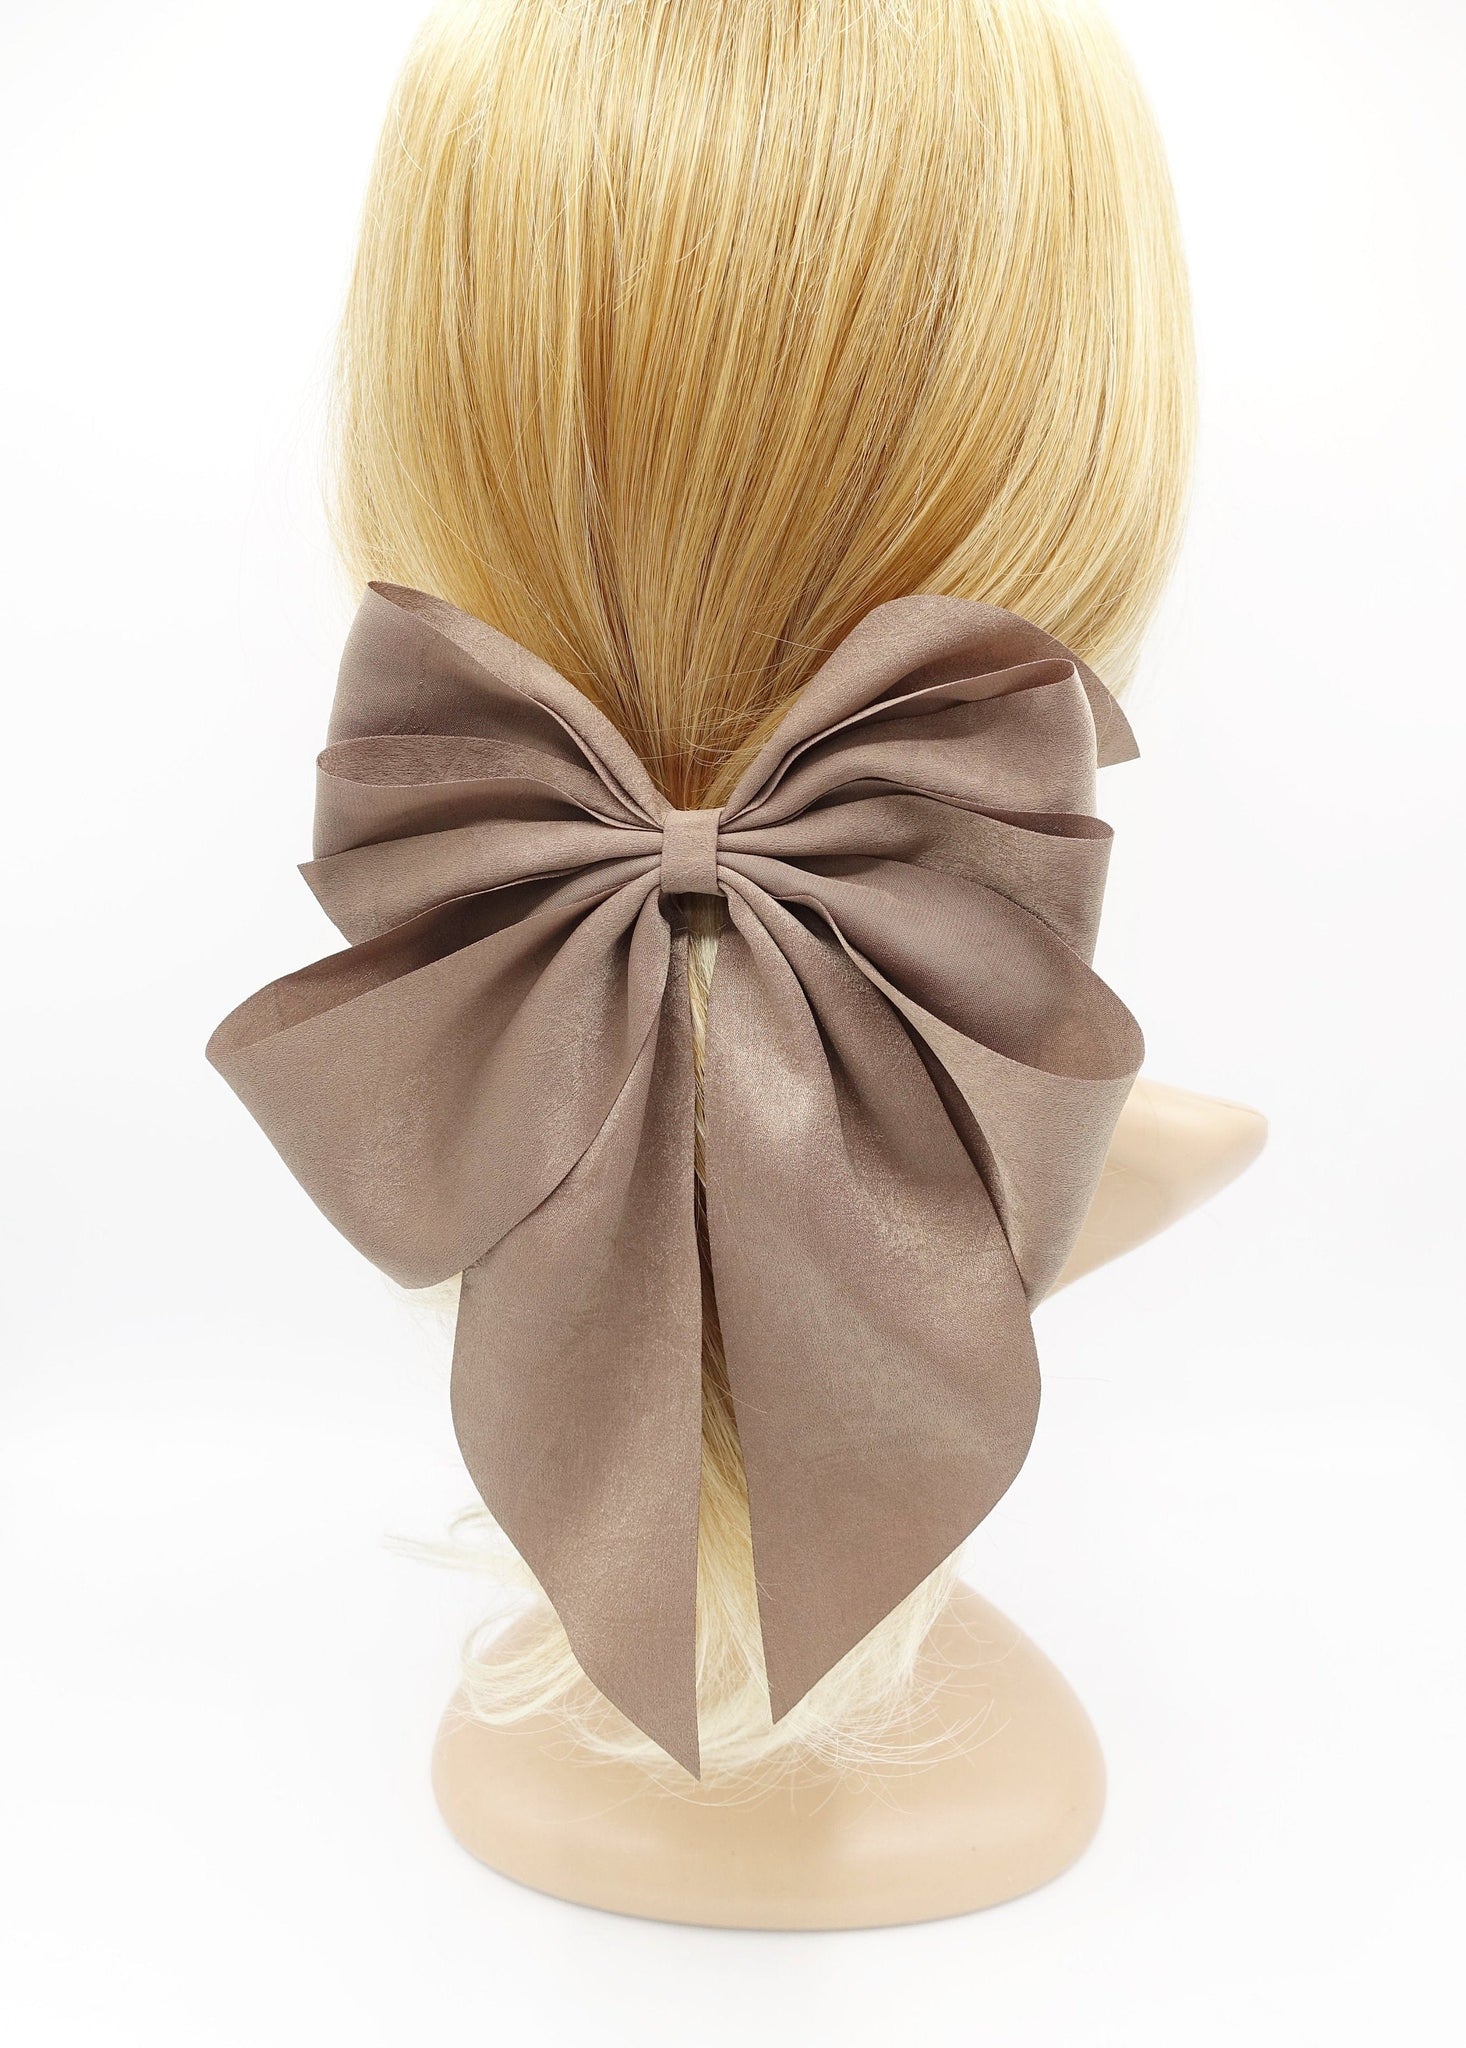 veryshine.com Barrette (Bow) multiple layered tail hair bow crinkled fabric pleated bow hair accessory for women